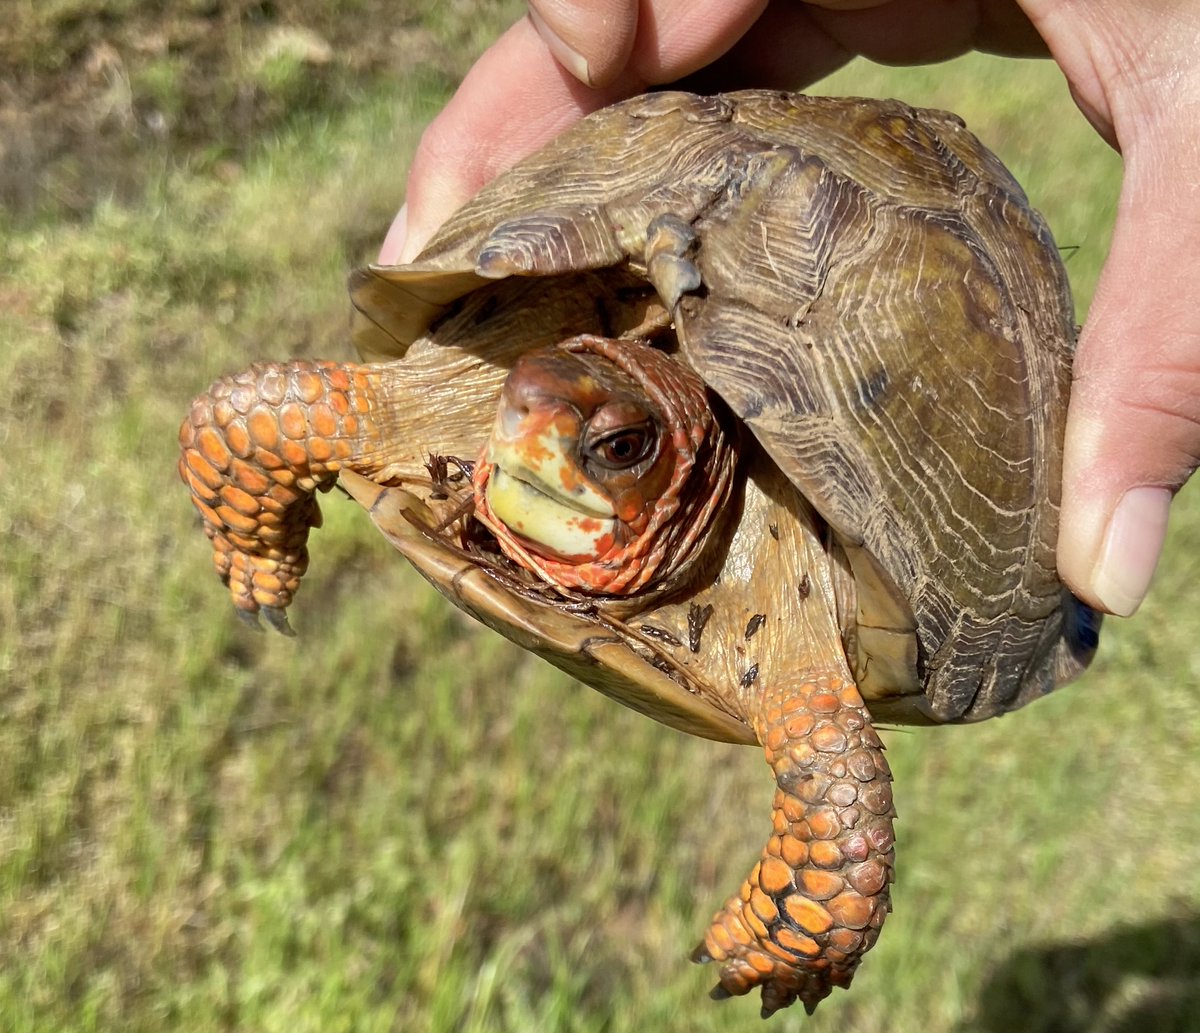 As the sun warms the earth, critters start moving about, including turtles. Please watch for them on roadways, don't run them over and lend a hand, moving them in the direction of their travel. But keep your pizza.